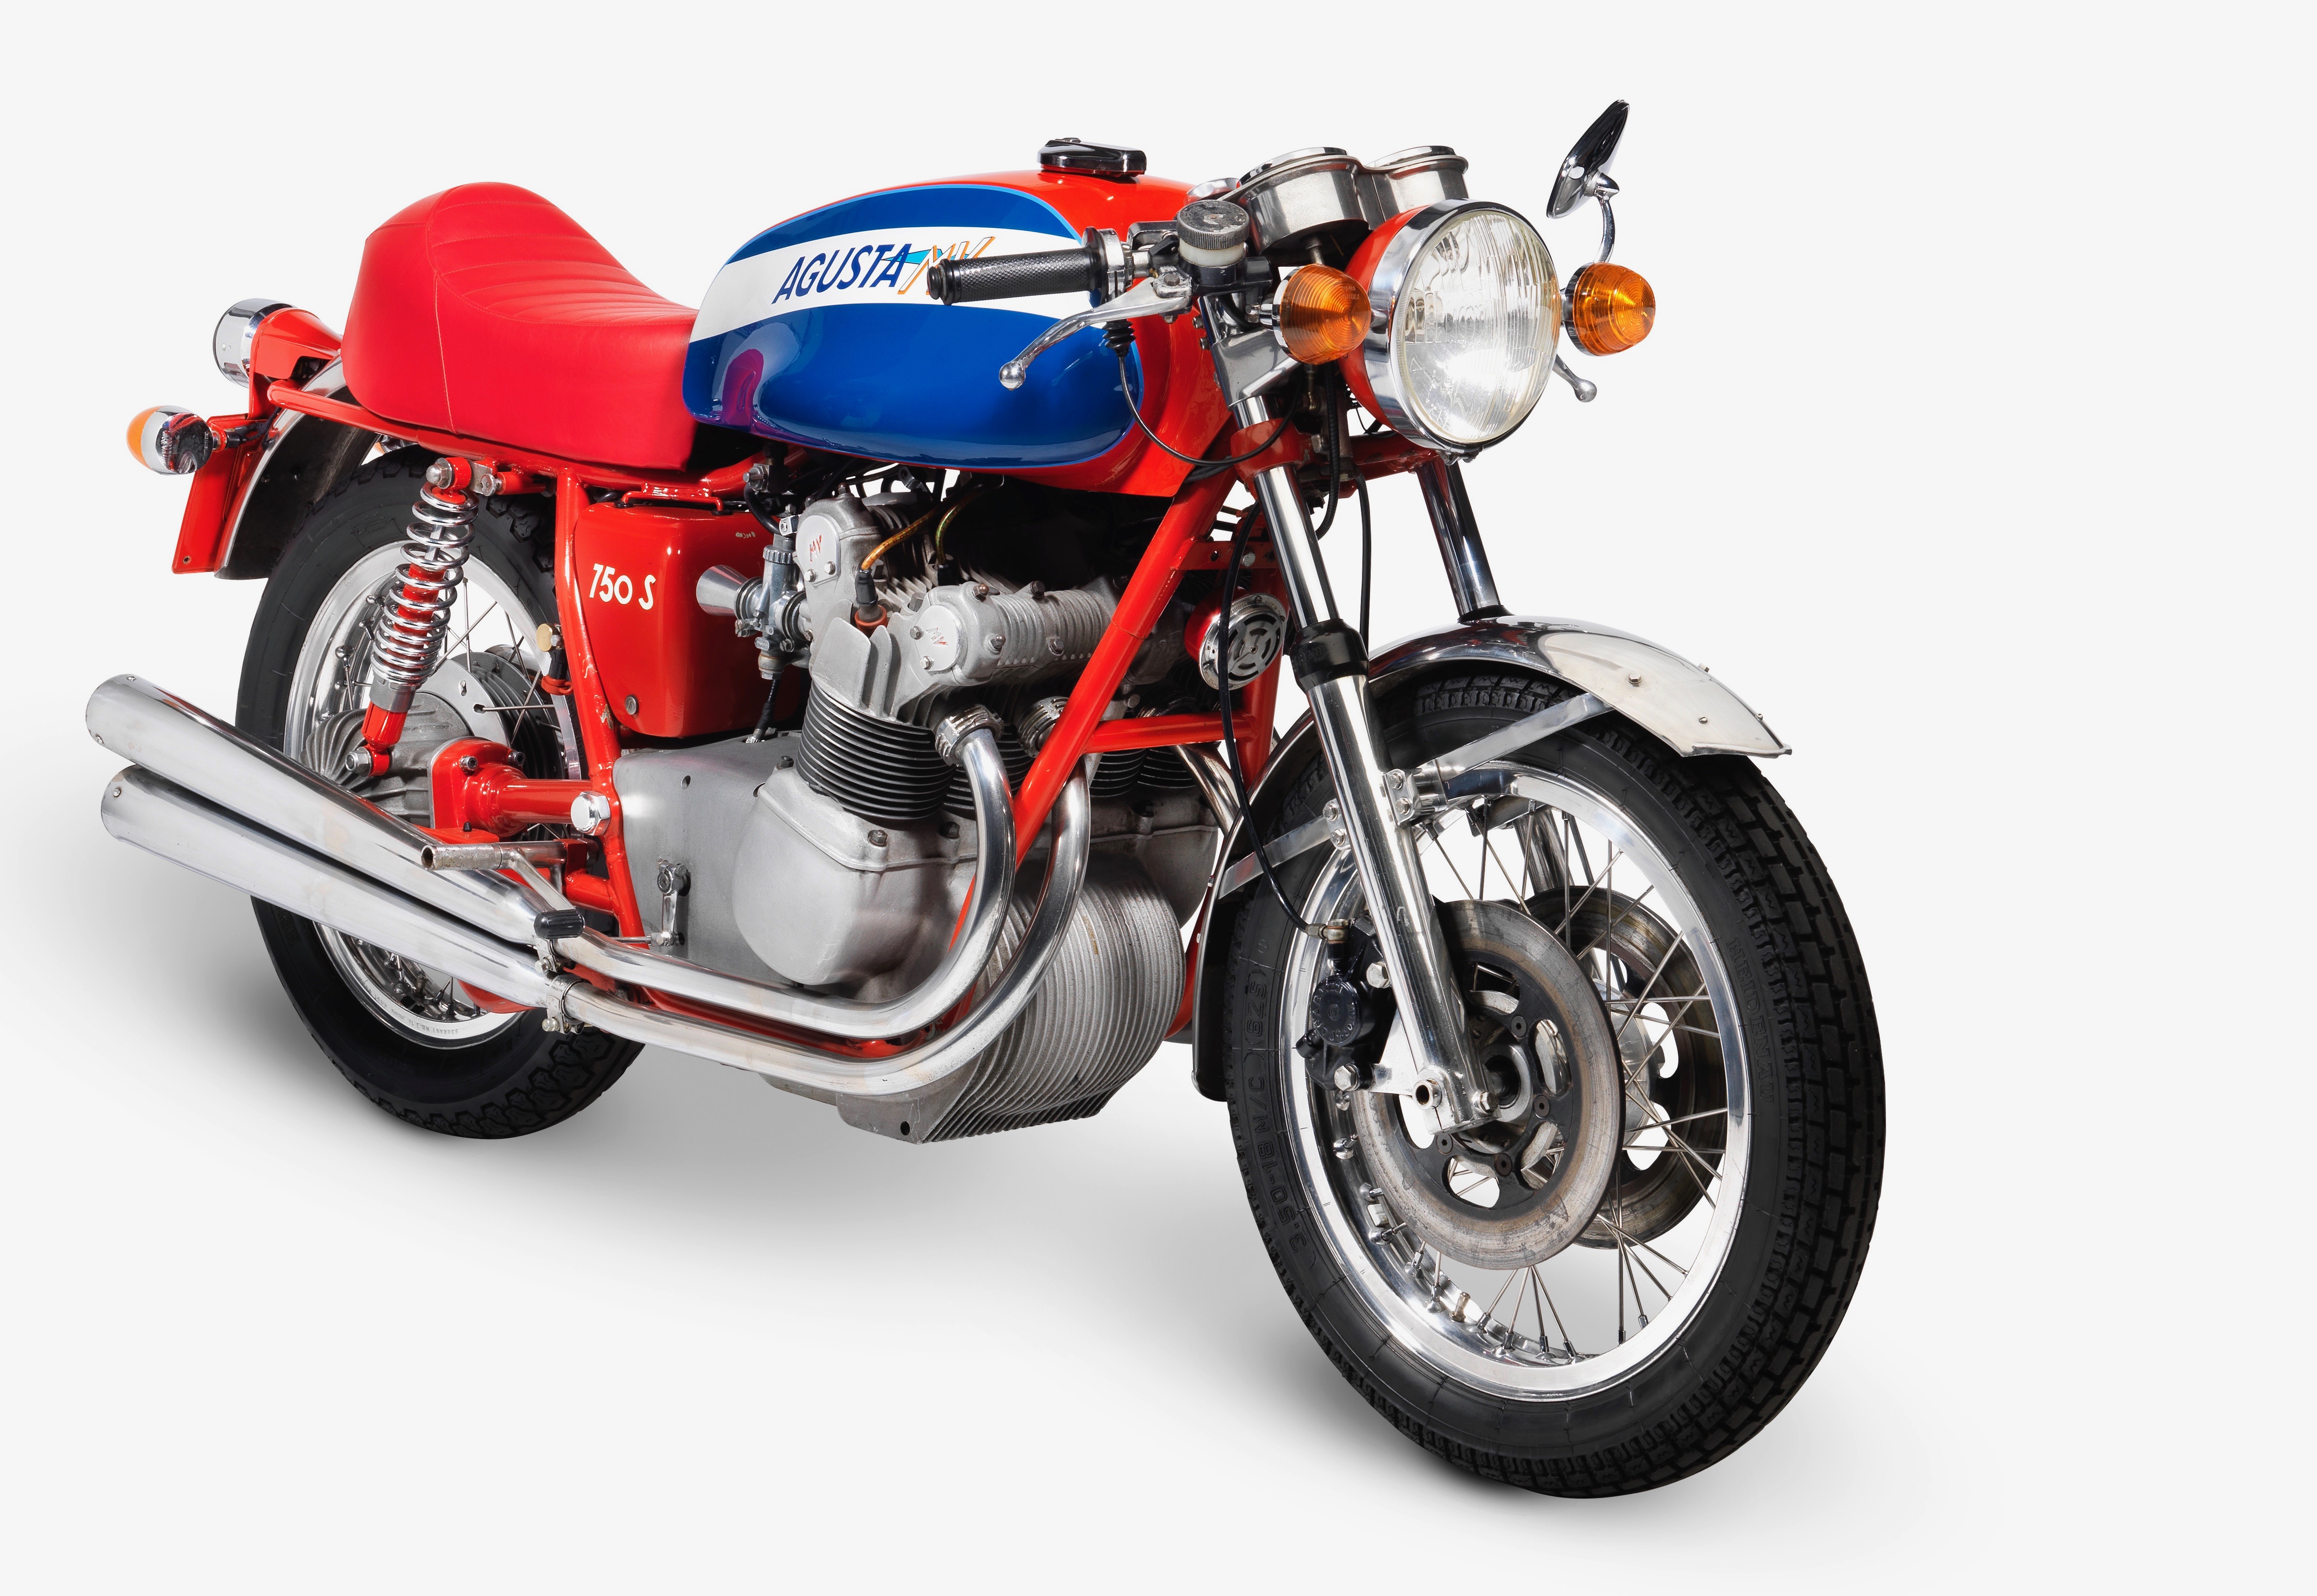 motorcycle auction, Bonhams boasts very strong spring motorcycle auction, ClassicCars.com Journal